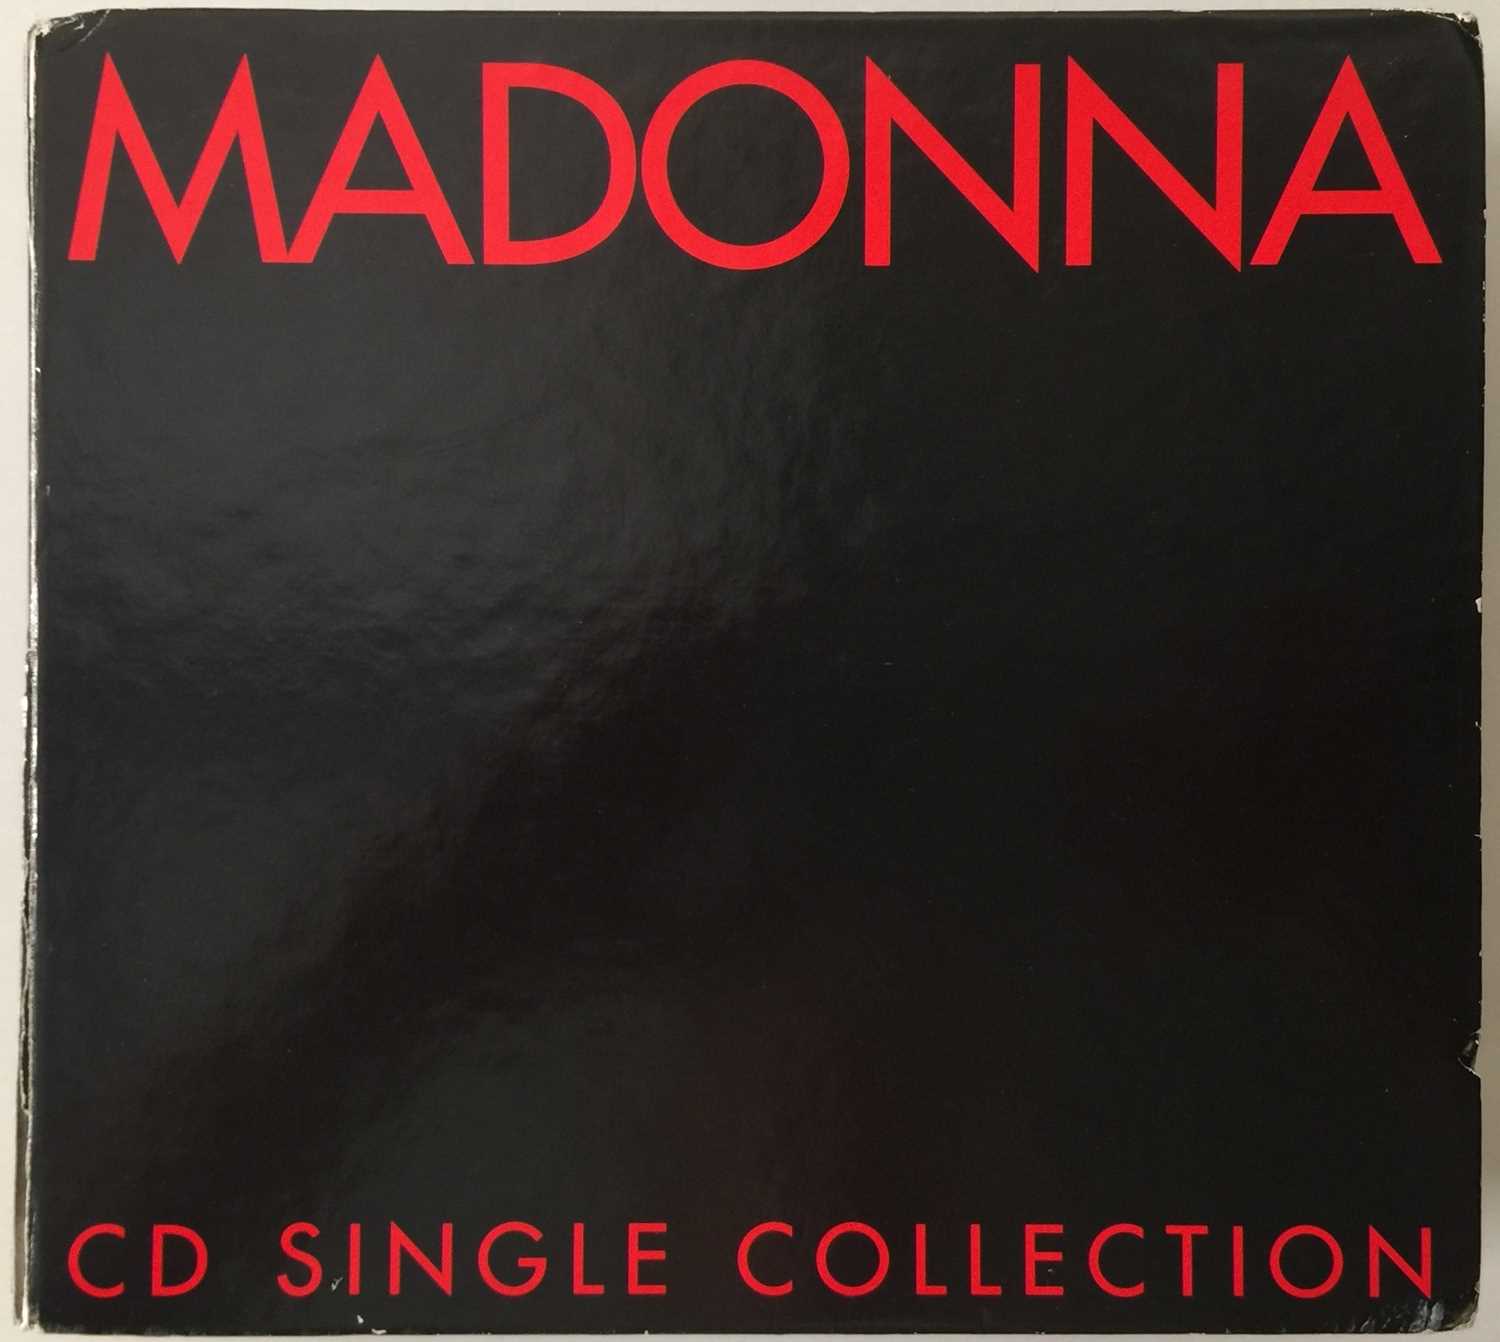 Lot 714 - MADONNA - CD SINGLE COLLECTION (LIMITED